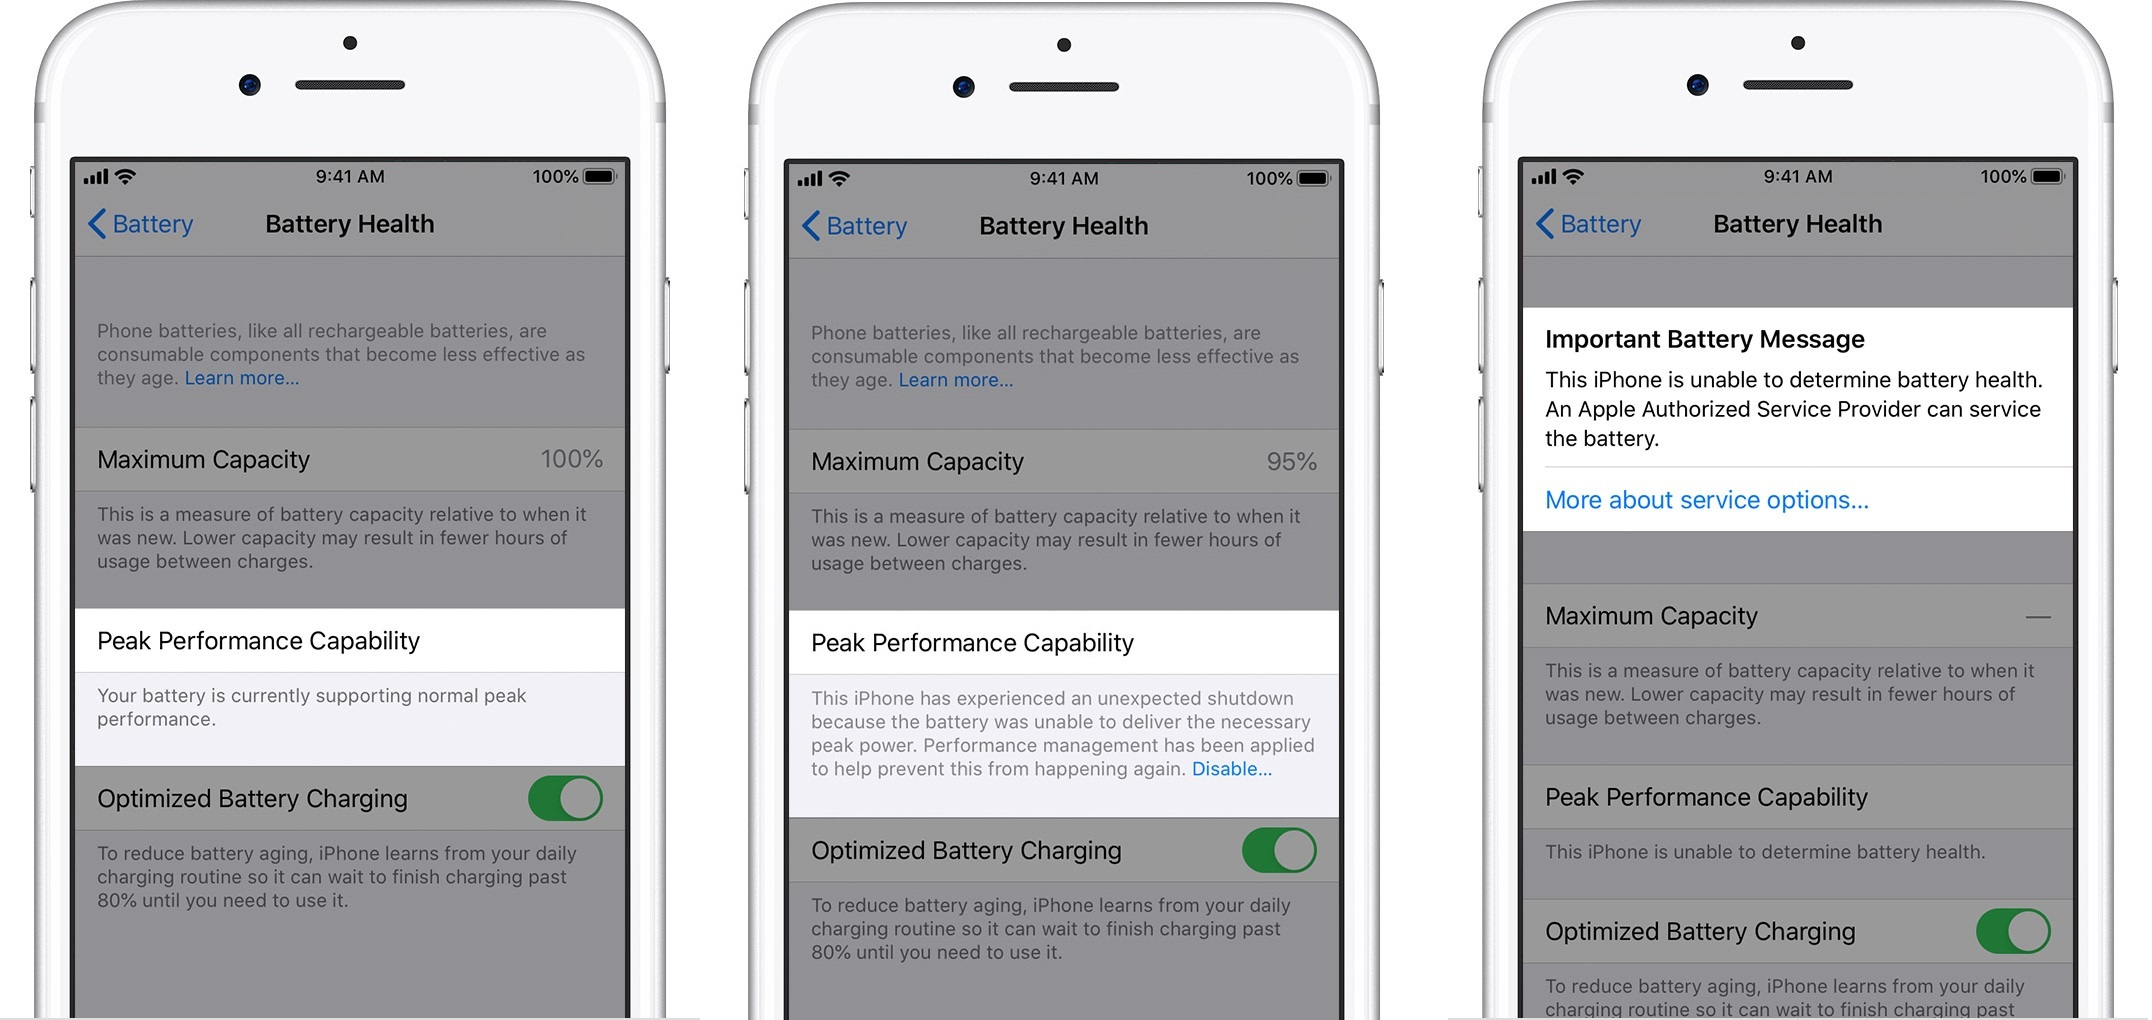 Apple iPhone battery health menus:Performance is normal, Performance management applied and Battery health unknown